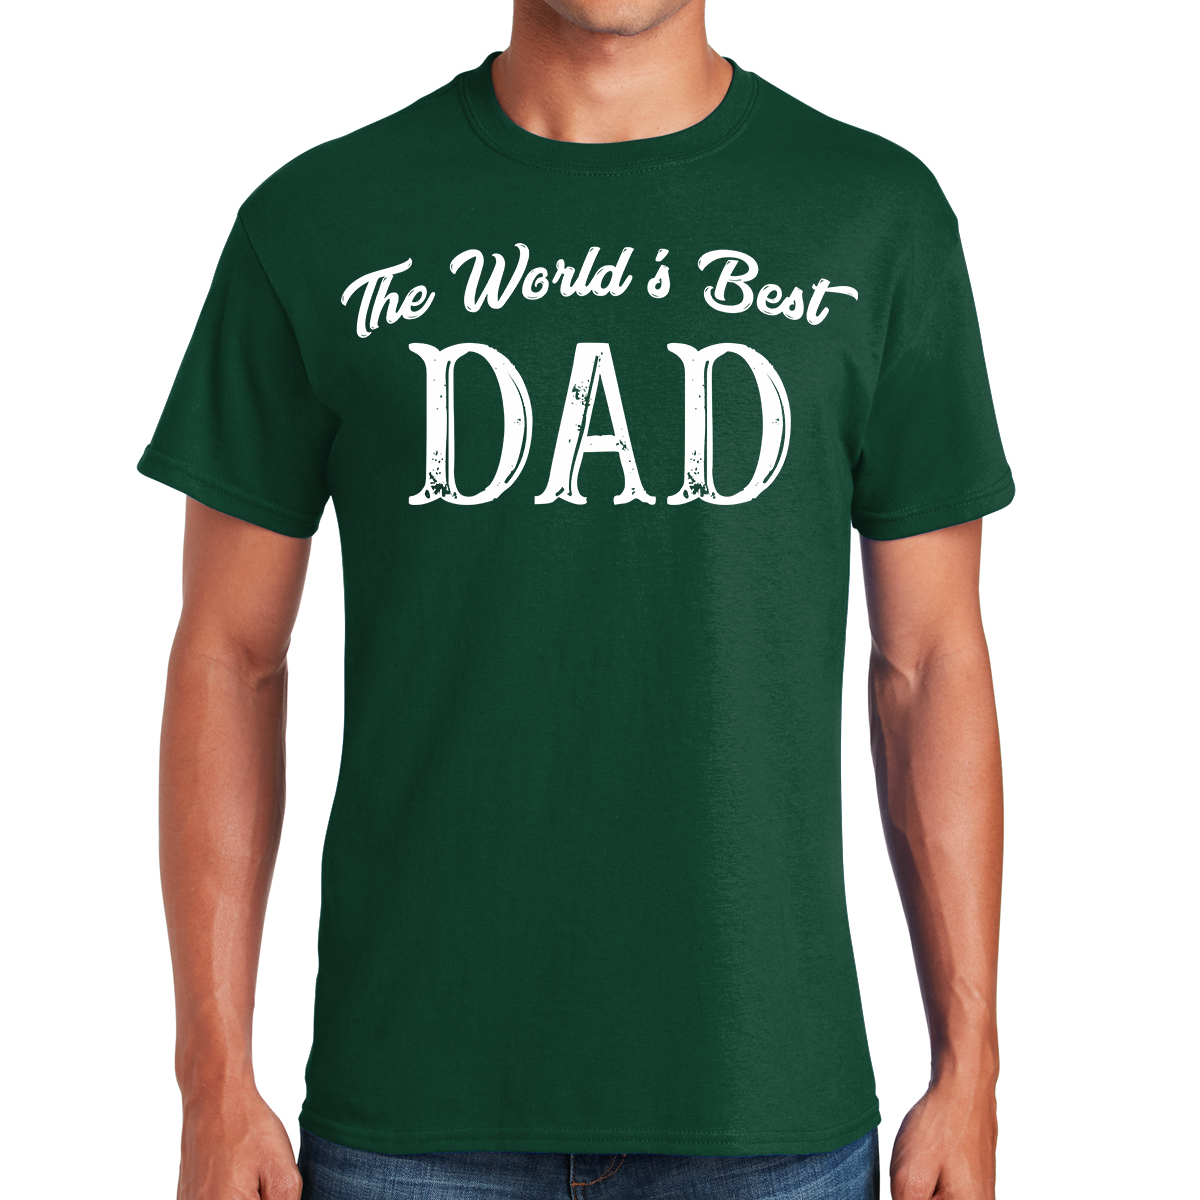 The World's Best Dad Wear It Proudly Awesome Dad T-shirt